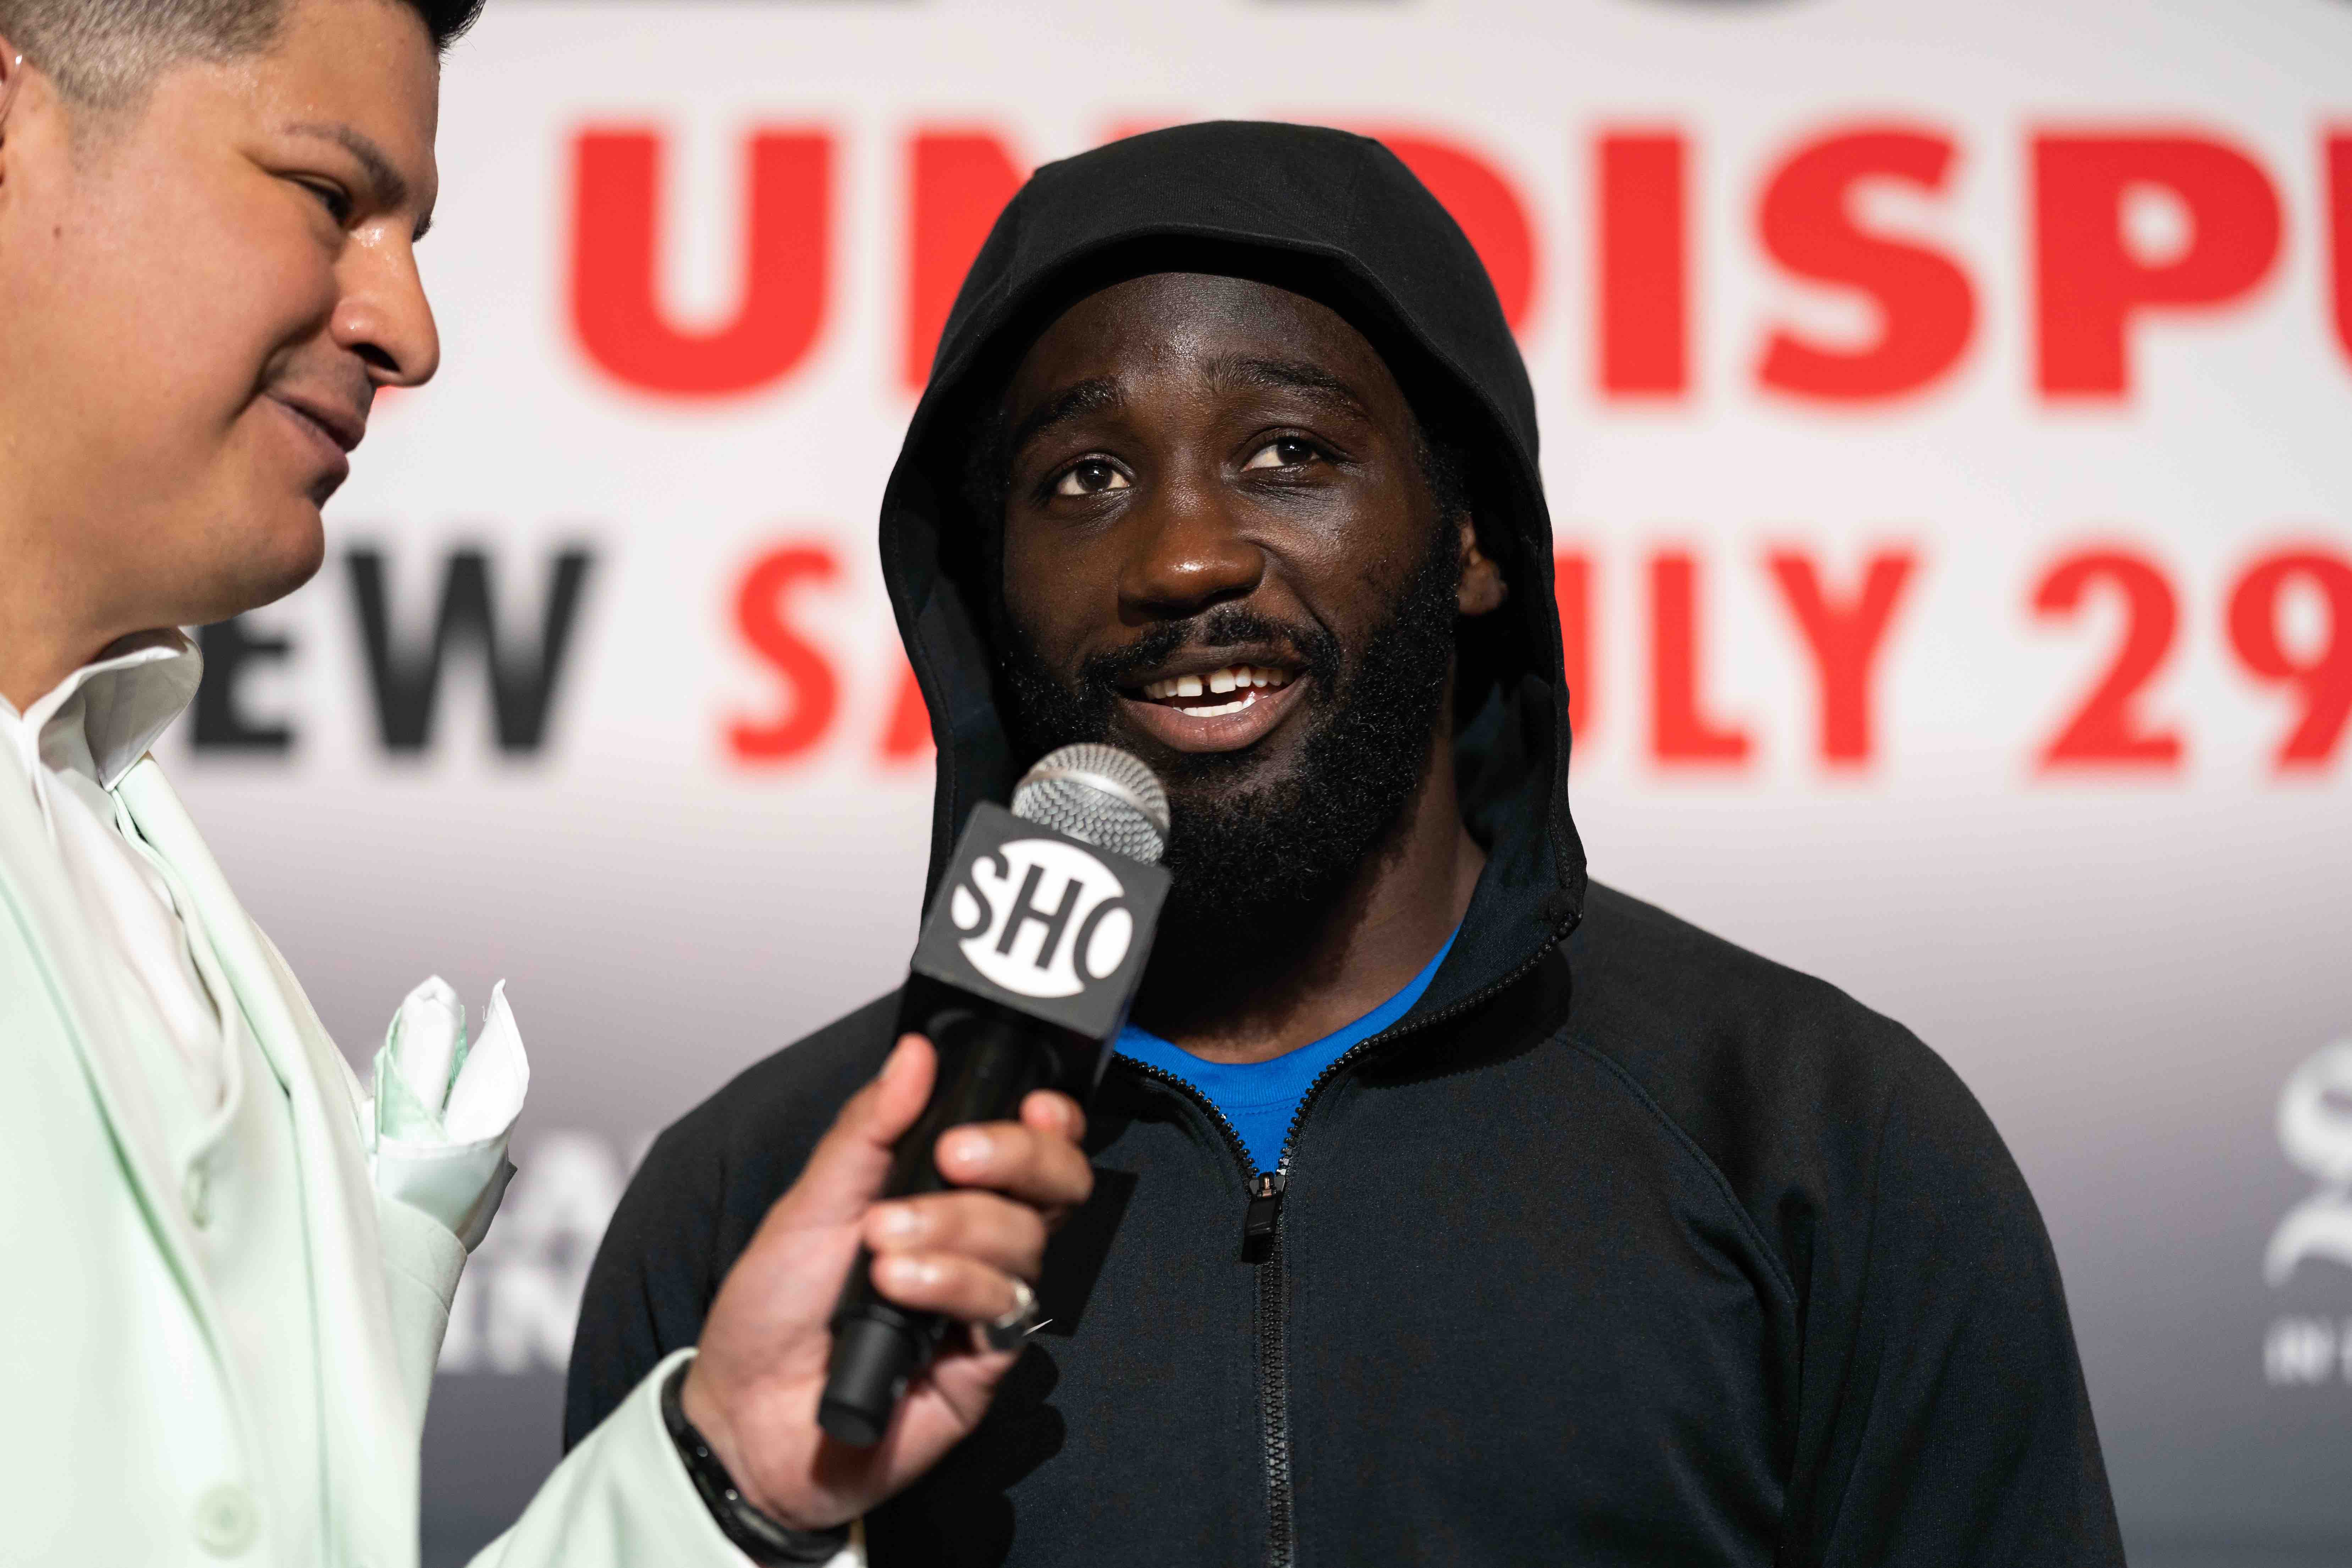 Crawford rules out super-fight with Canelo